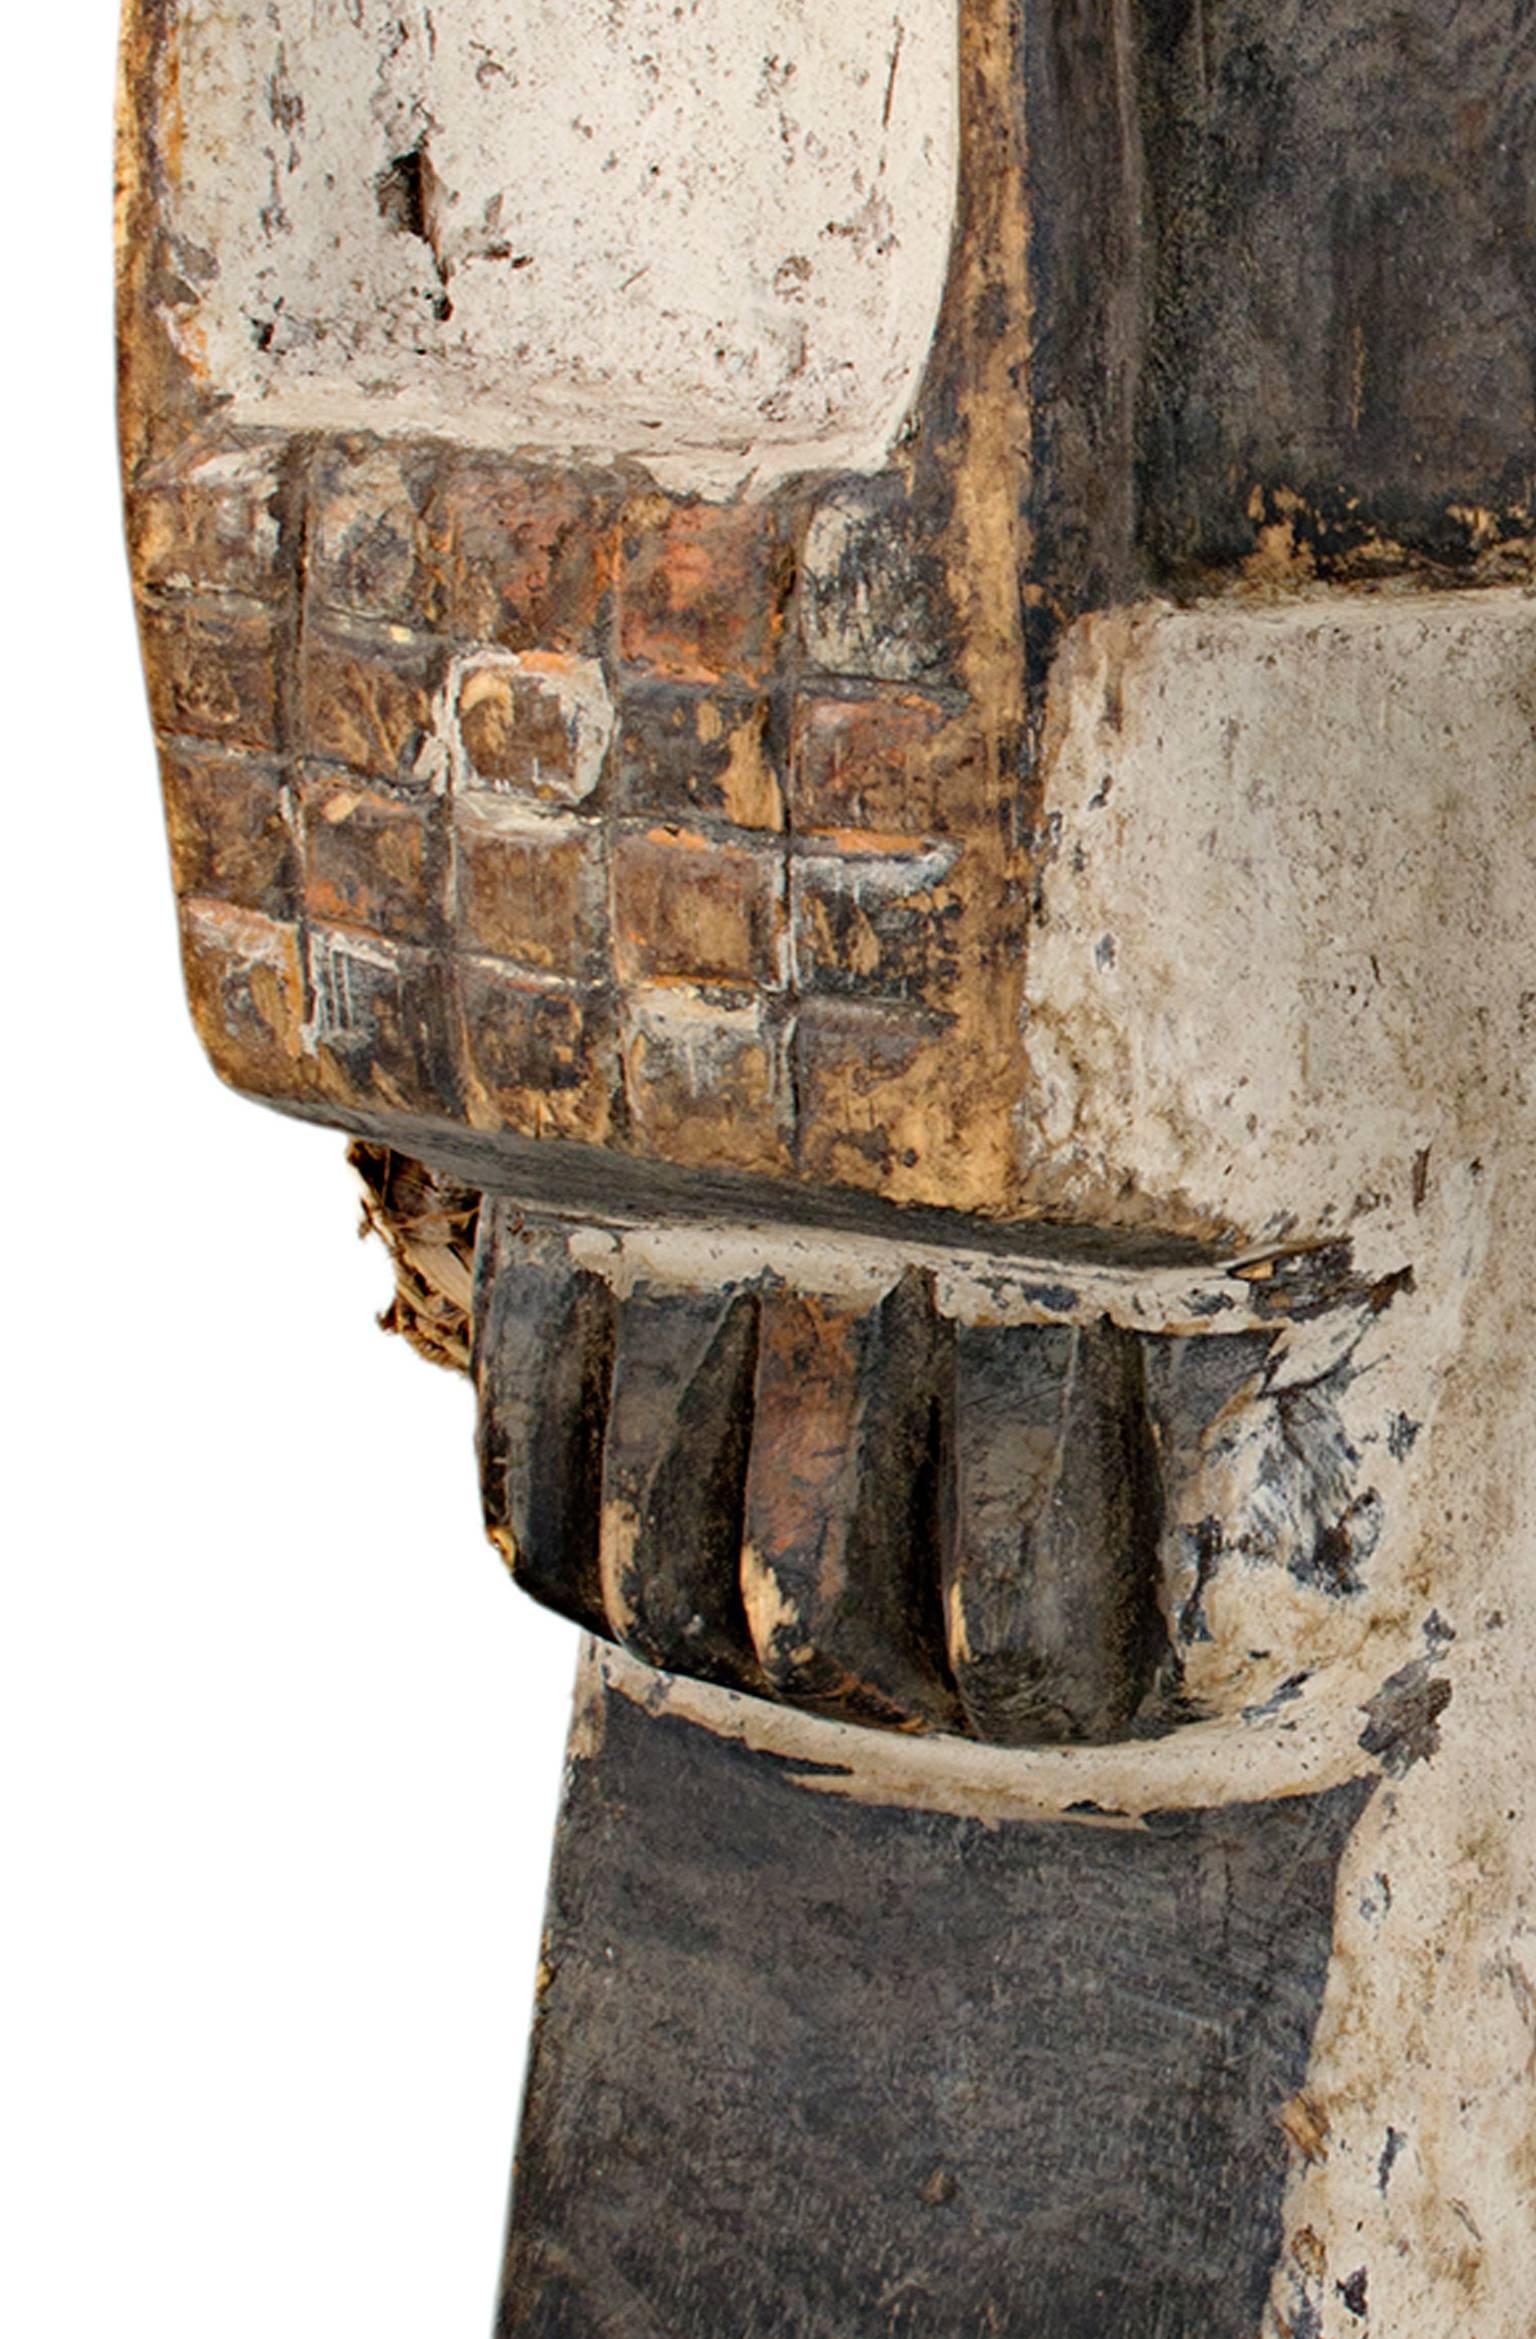 This mask was created by an unknown artist from the Waawa-Igbo tribe of Nigeria. It is made of wood. Amongst the Waawa people there is a lot of cultural diversity, and each locality can be identified by their unique style of music and cultural